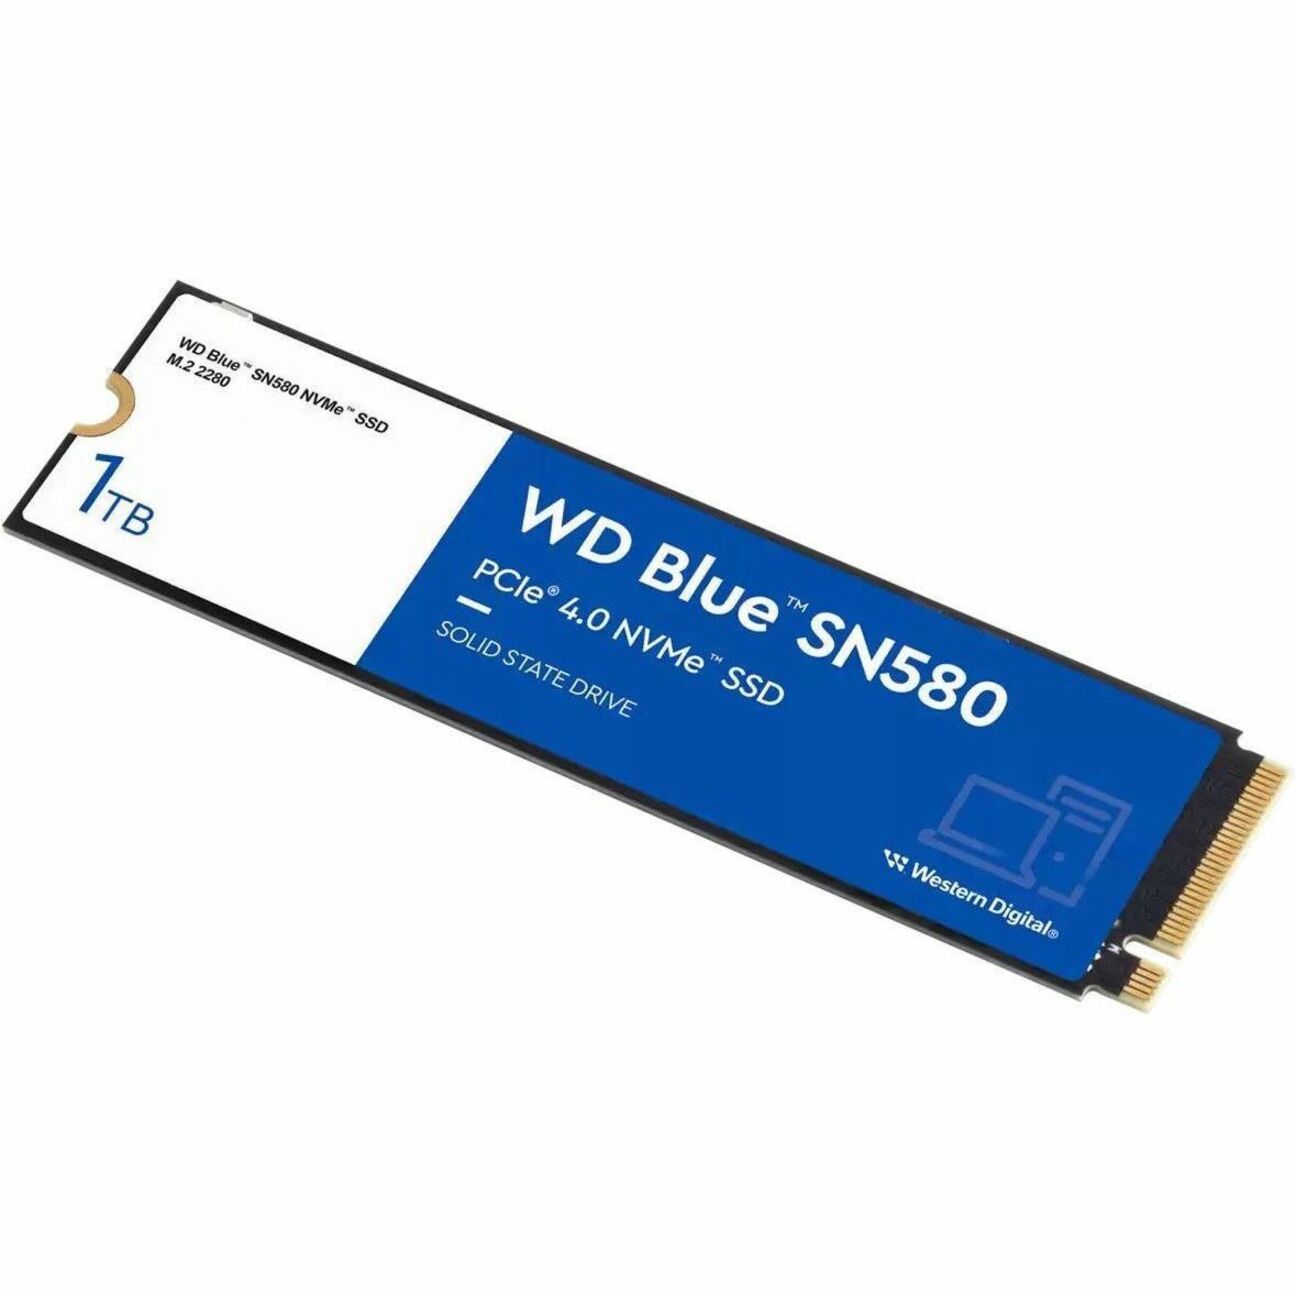 WD WDS100T3B0E Blue SN580 NVMe SSD, 1 TB, 5 Year Limited Warranty, Notebook Compatible